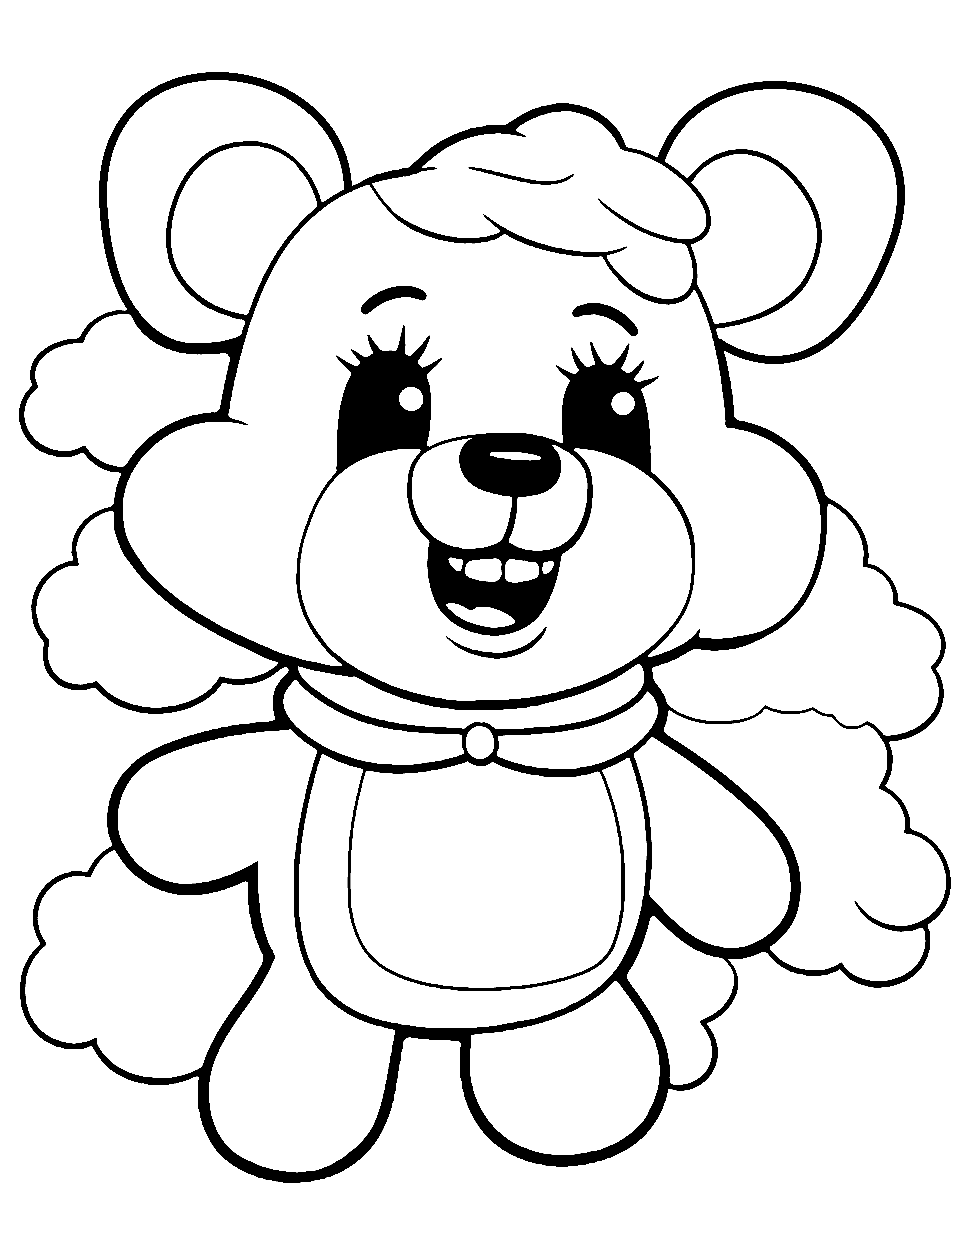 25 Five Nights At Freddy's Coloring Pages: Free Printables